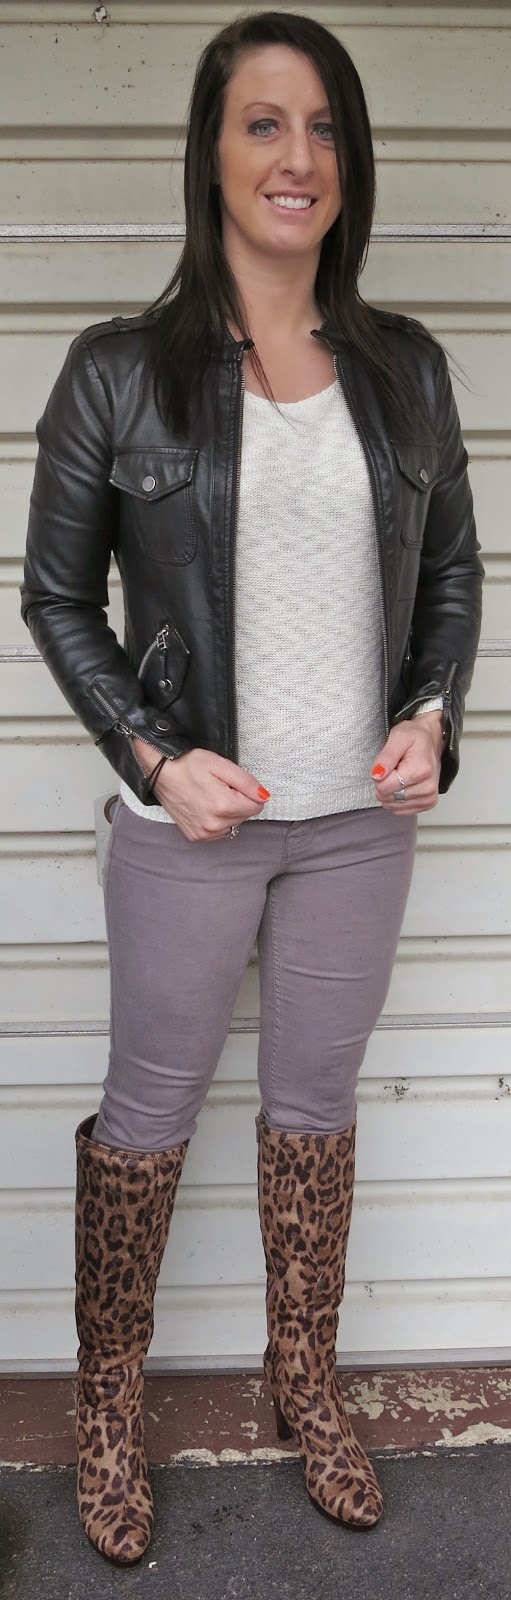 leopard boots, leather jacket, grey jeans, fashion, outfit